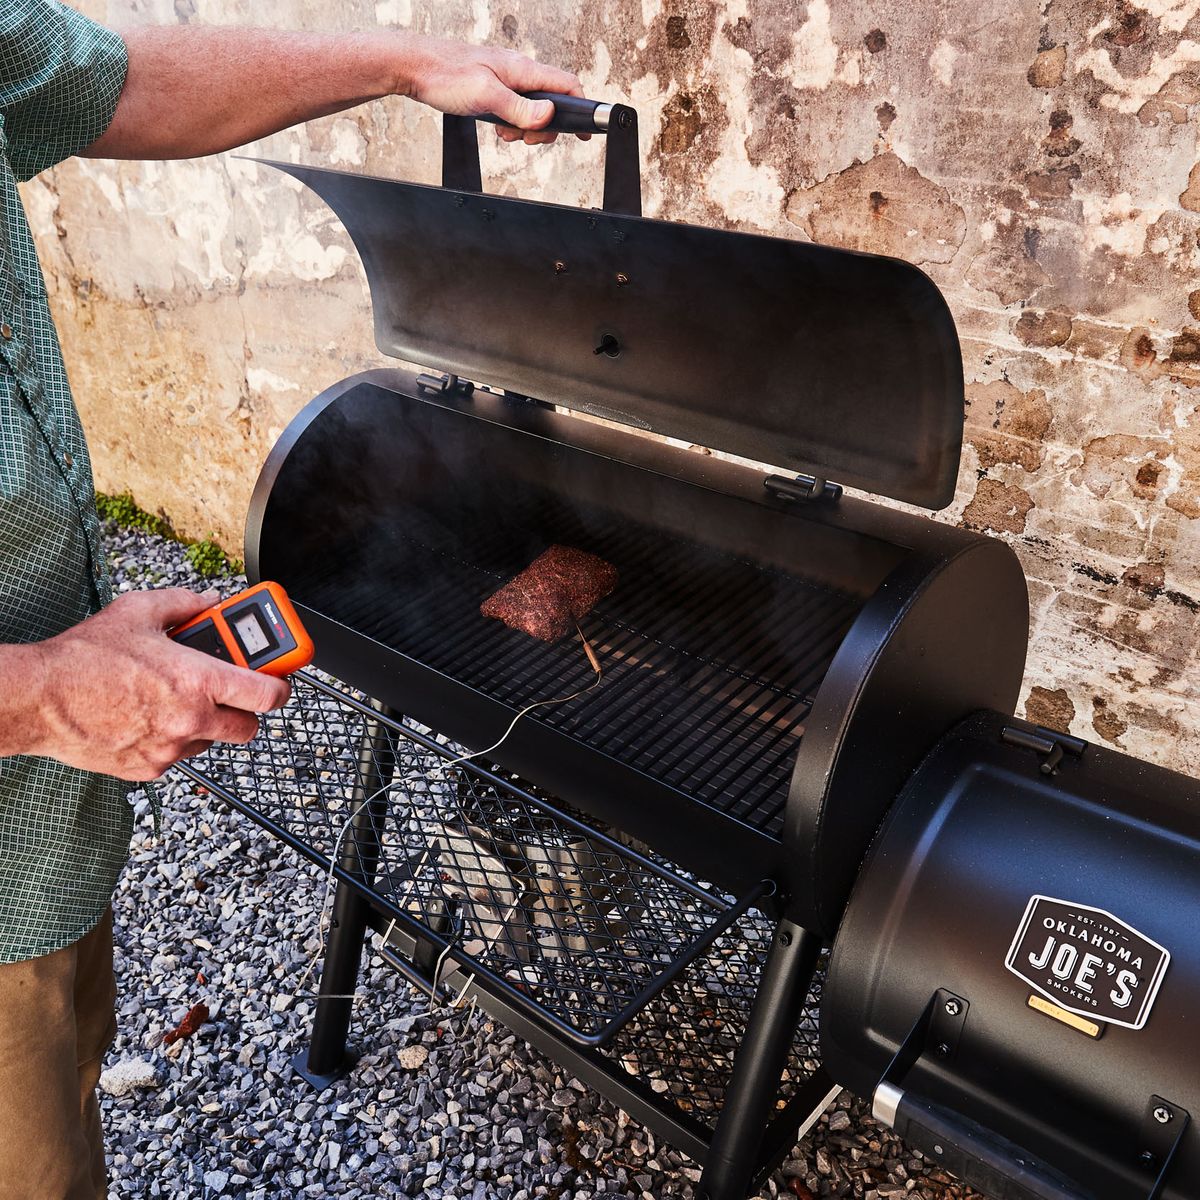 The 5 best grilling thermometers, shared by food experts